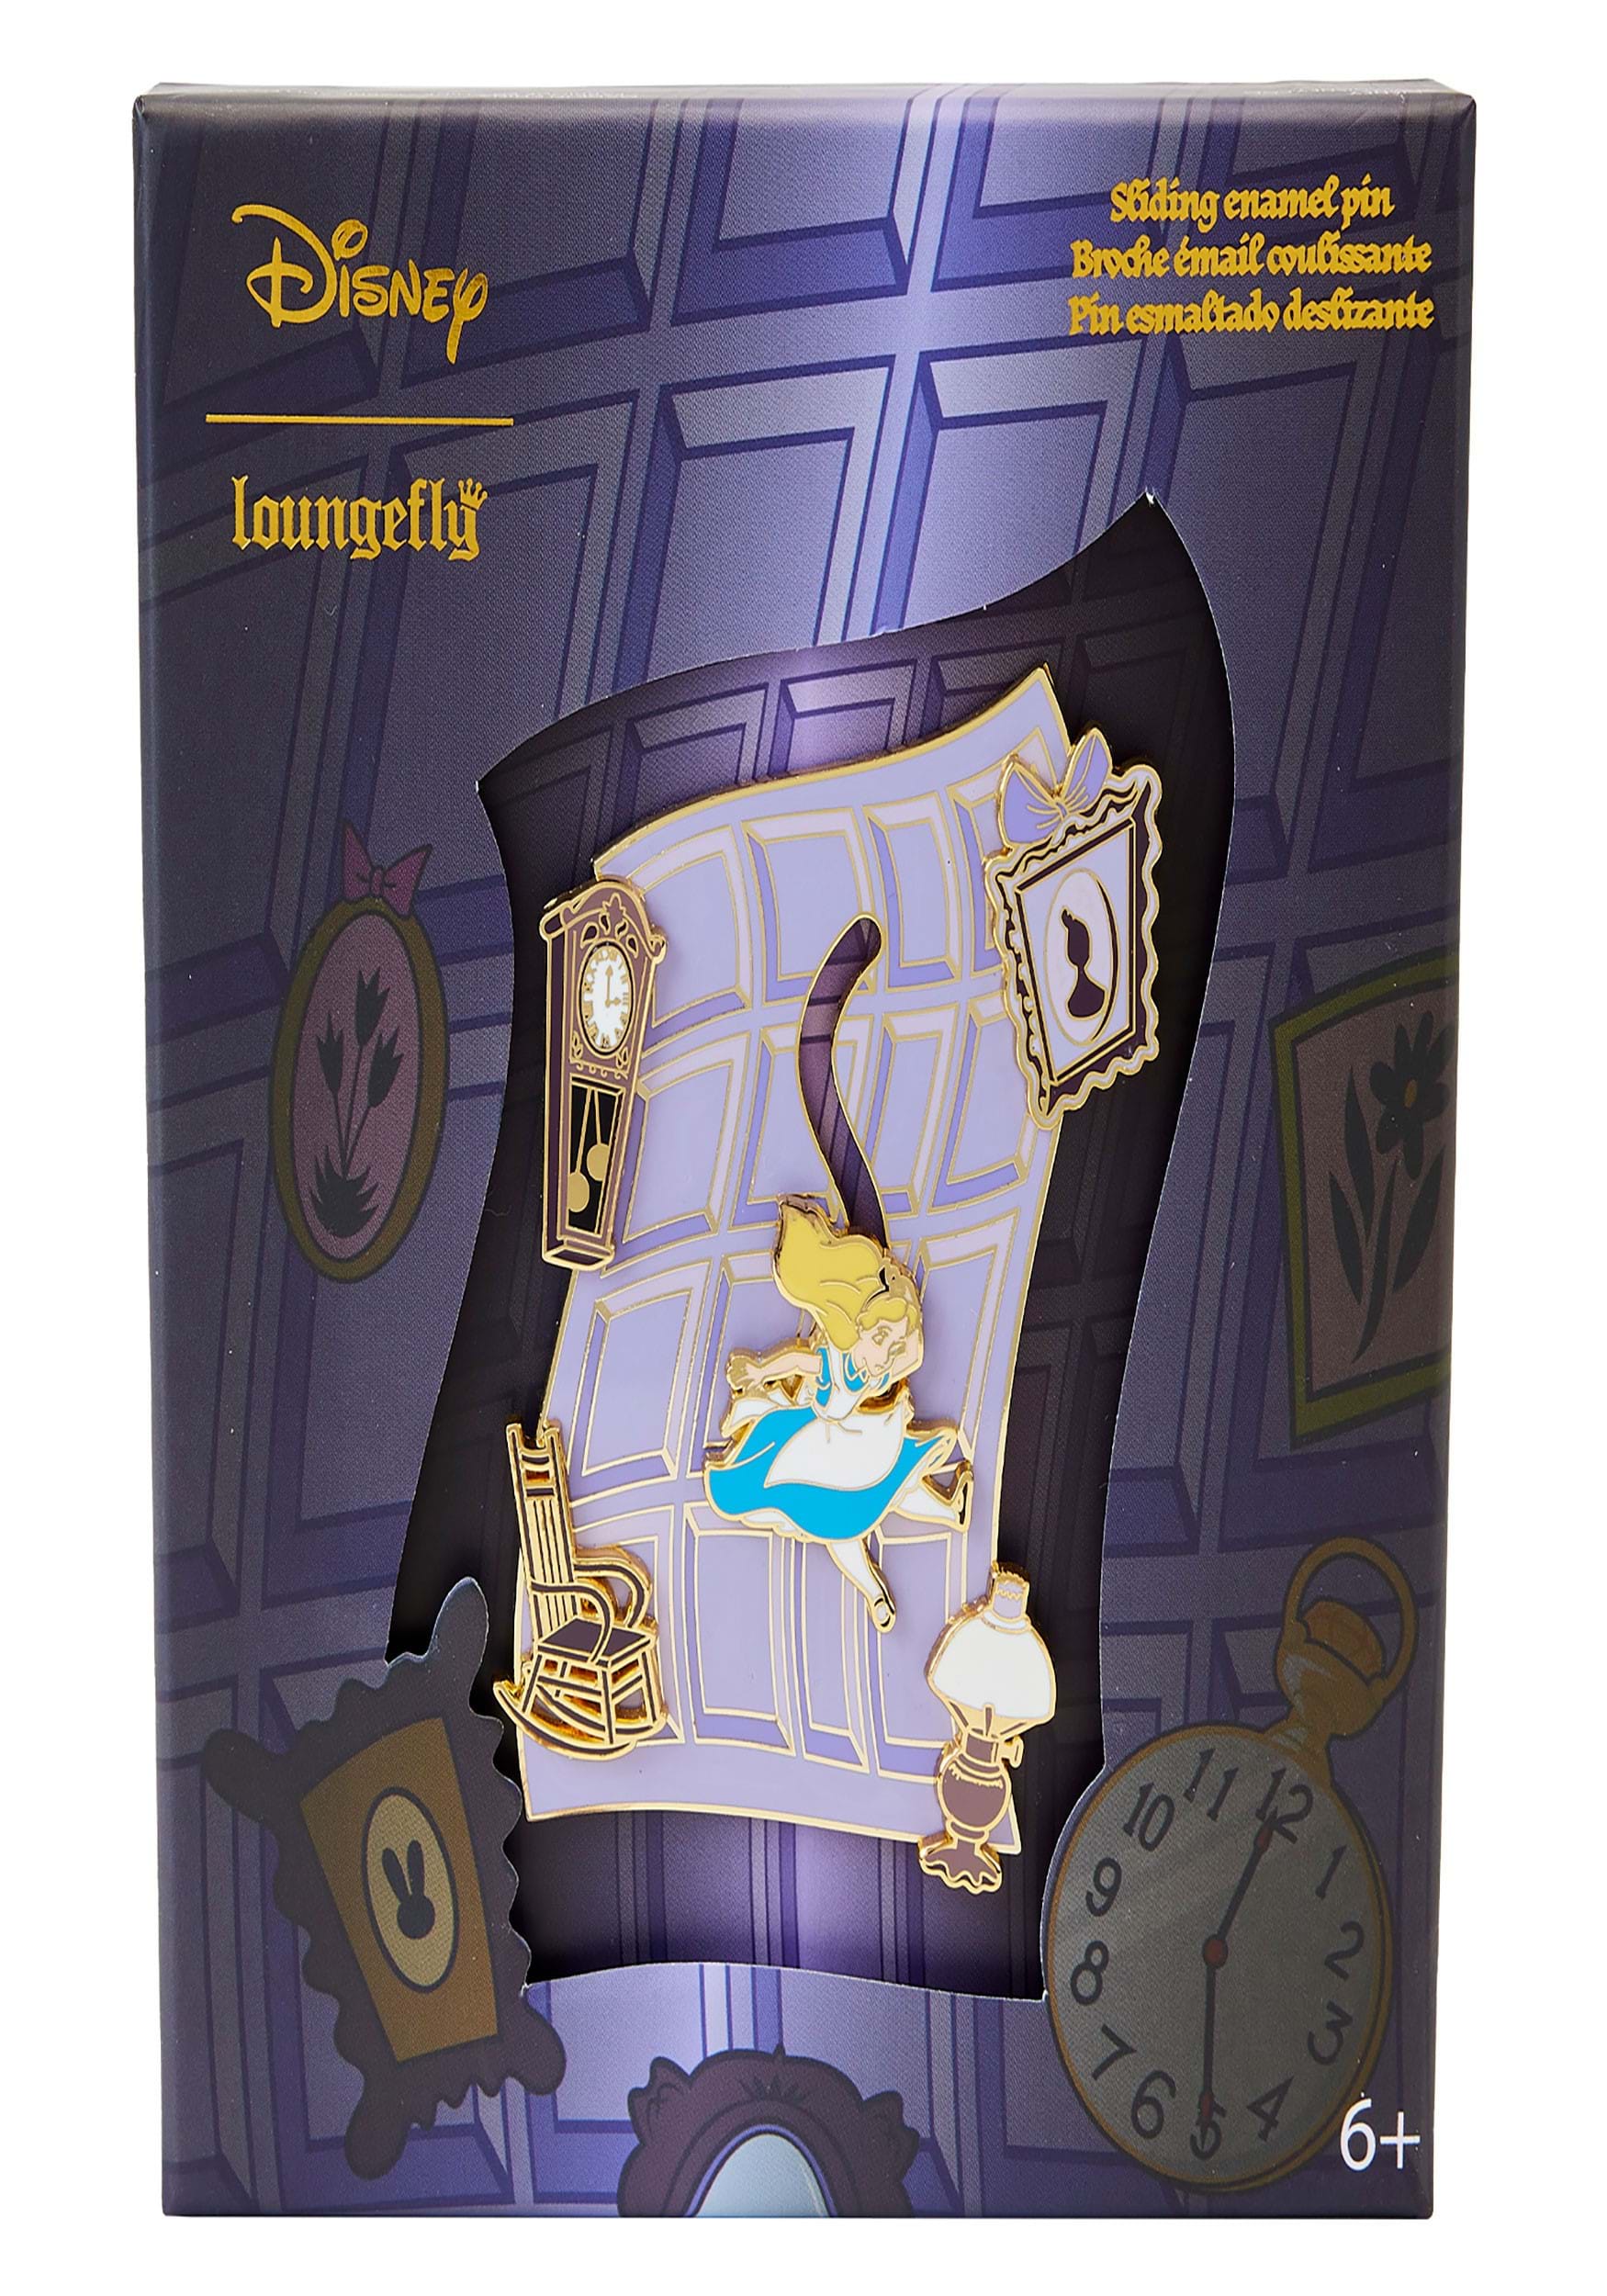 https://images.fun.com/products/91848/1-1/loungefly-disney-alice-in-wonderland-falling-down-pin.jpg